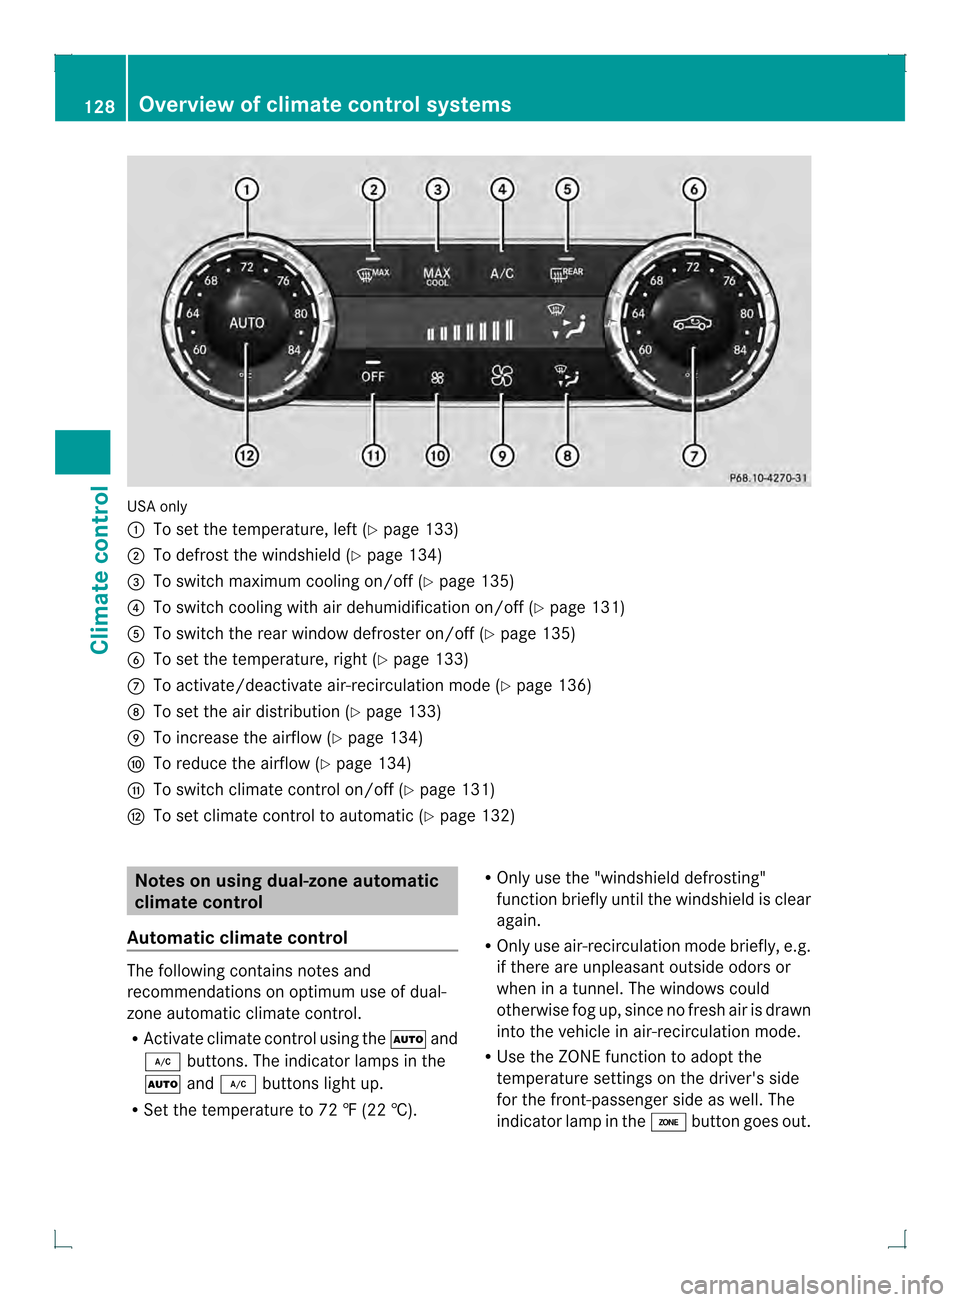 MERCEDES-BENZ GLK-Class 2013 X204 User Guide USA only
0002
To set the temperature, left (Y page 133)
0003 To defrost the windshield (Y page 134)
0021 To switch maximum cooling on/off (Y page 135)
0020 To switch cooling with air dehumidification 